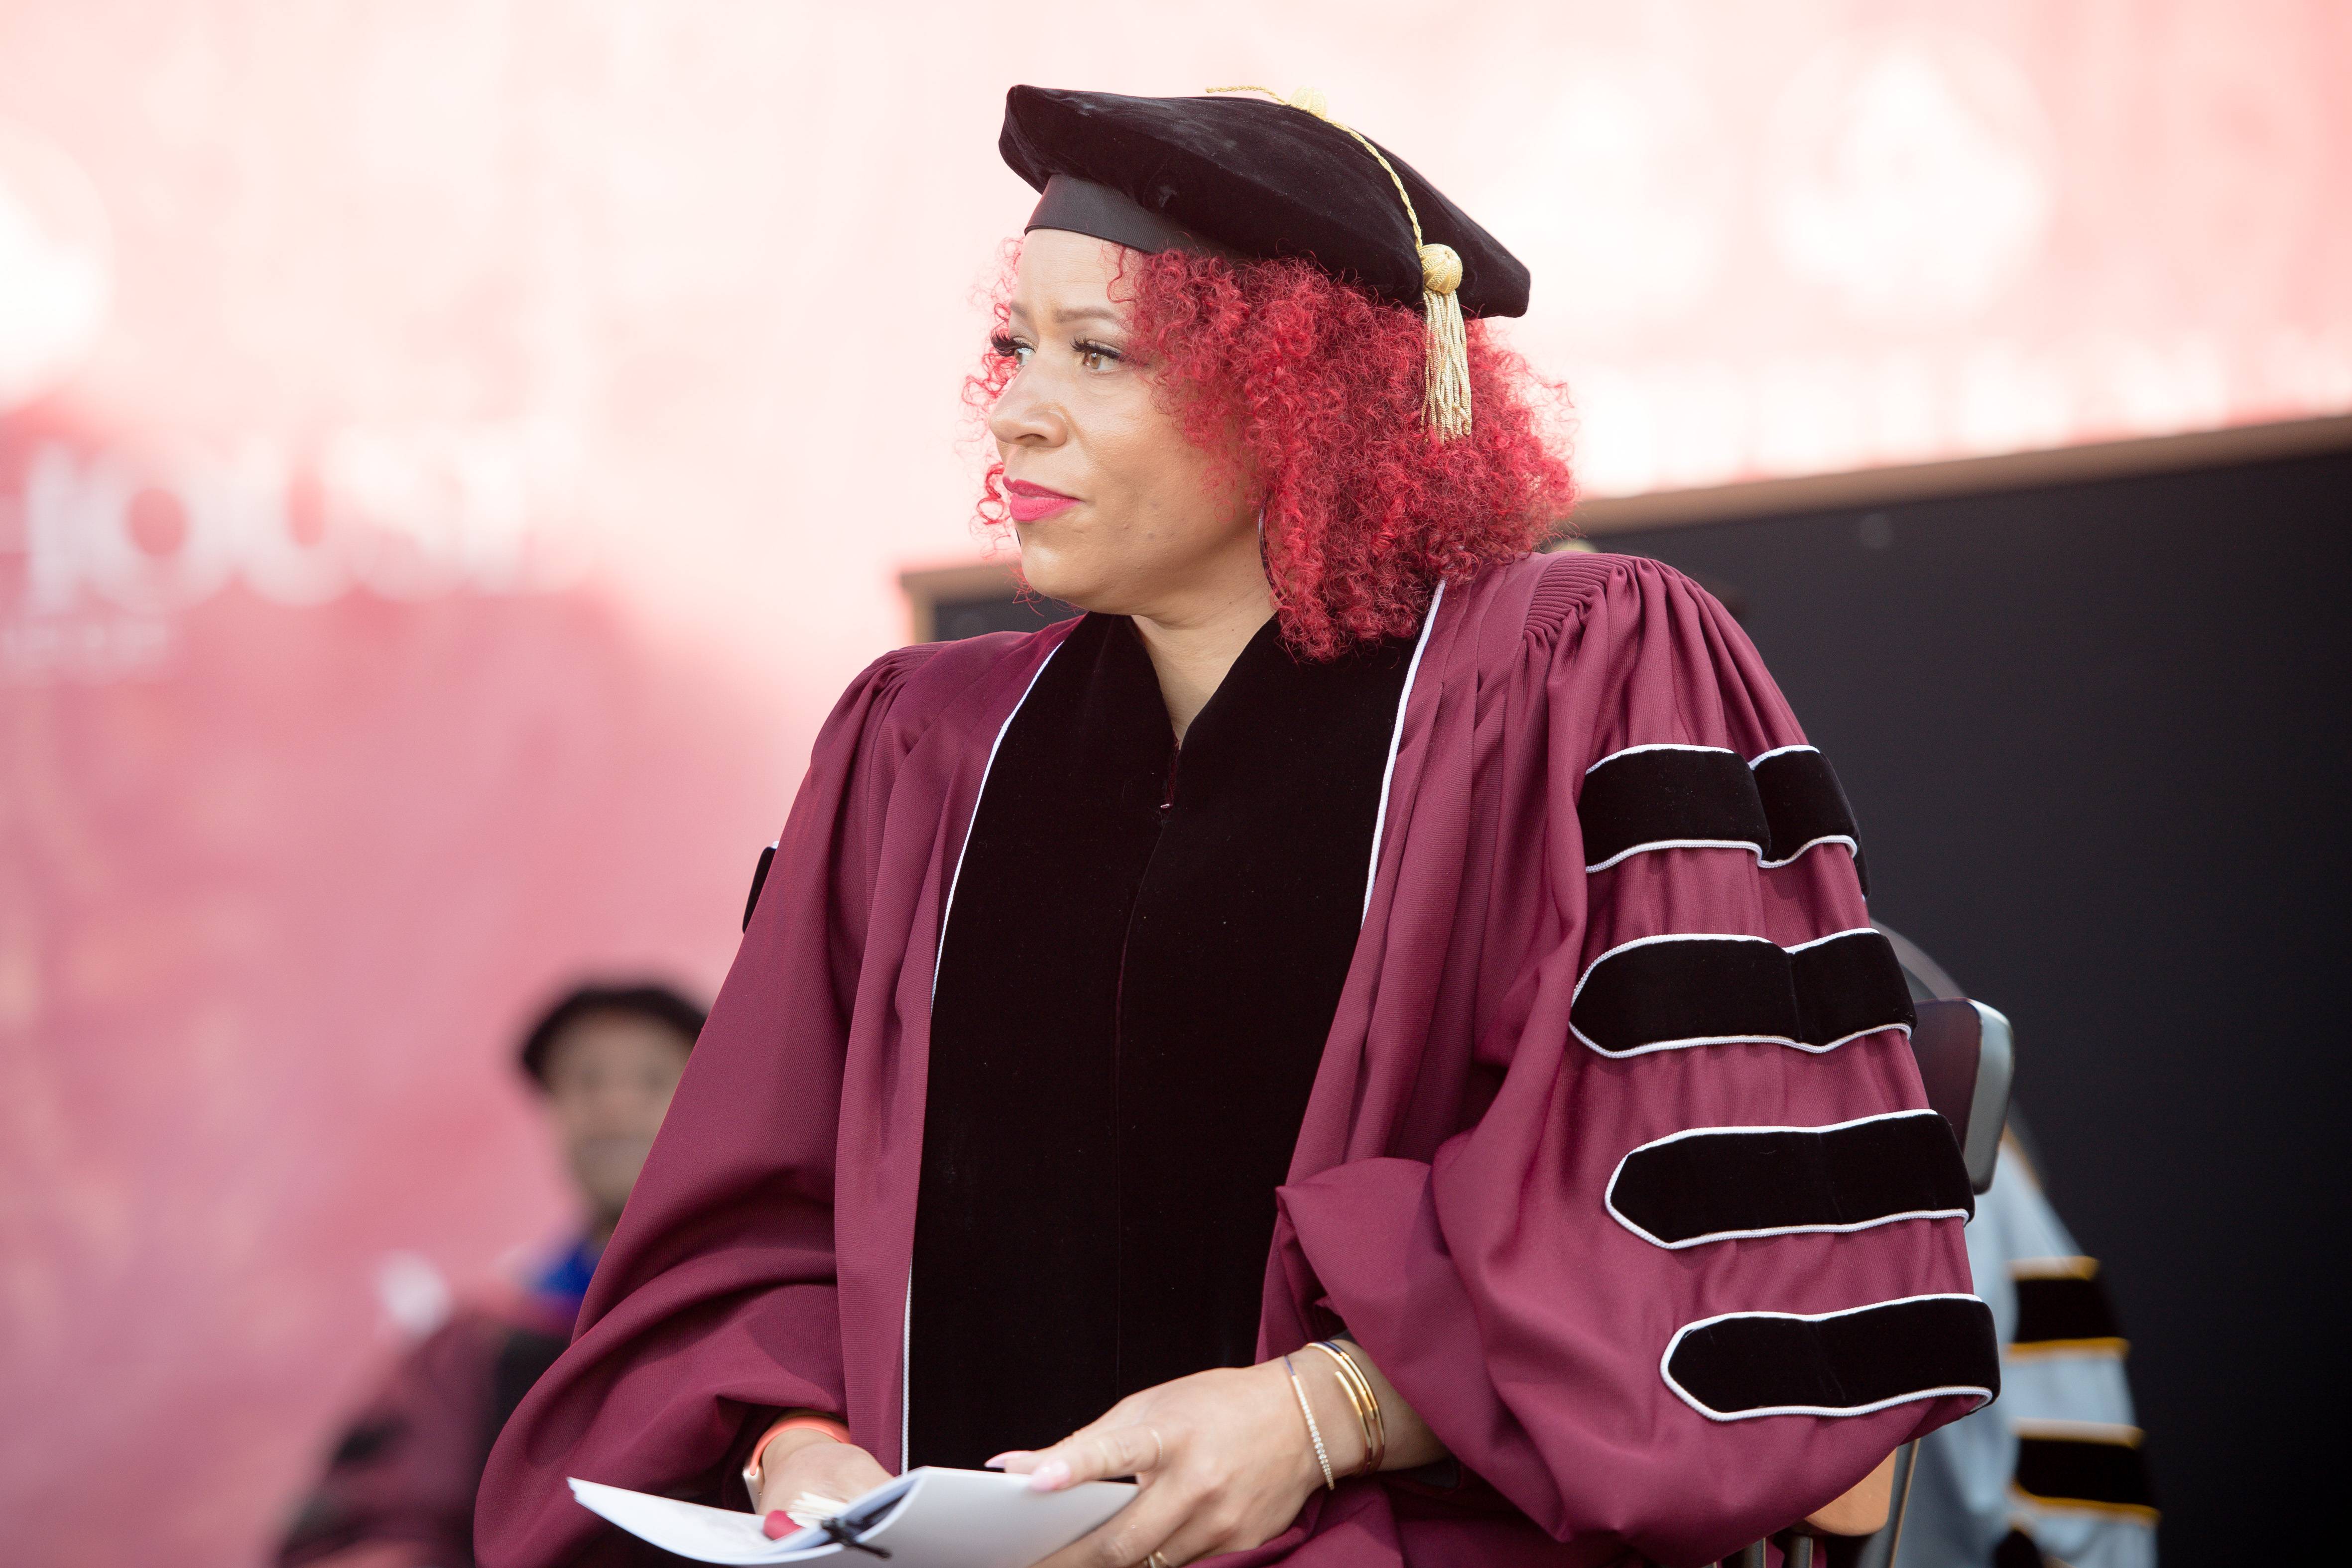 ATLANTA, GEORGIA - MAY 16: Author Nikole Hannah-Jones attends the 137th Commencement at Morehouse College on May 16, 2021 in Atlanta, Georgia. (Photo by Marcus Ingram/Getty Images)